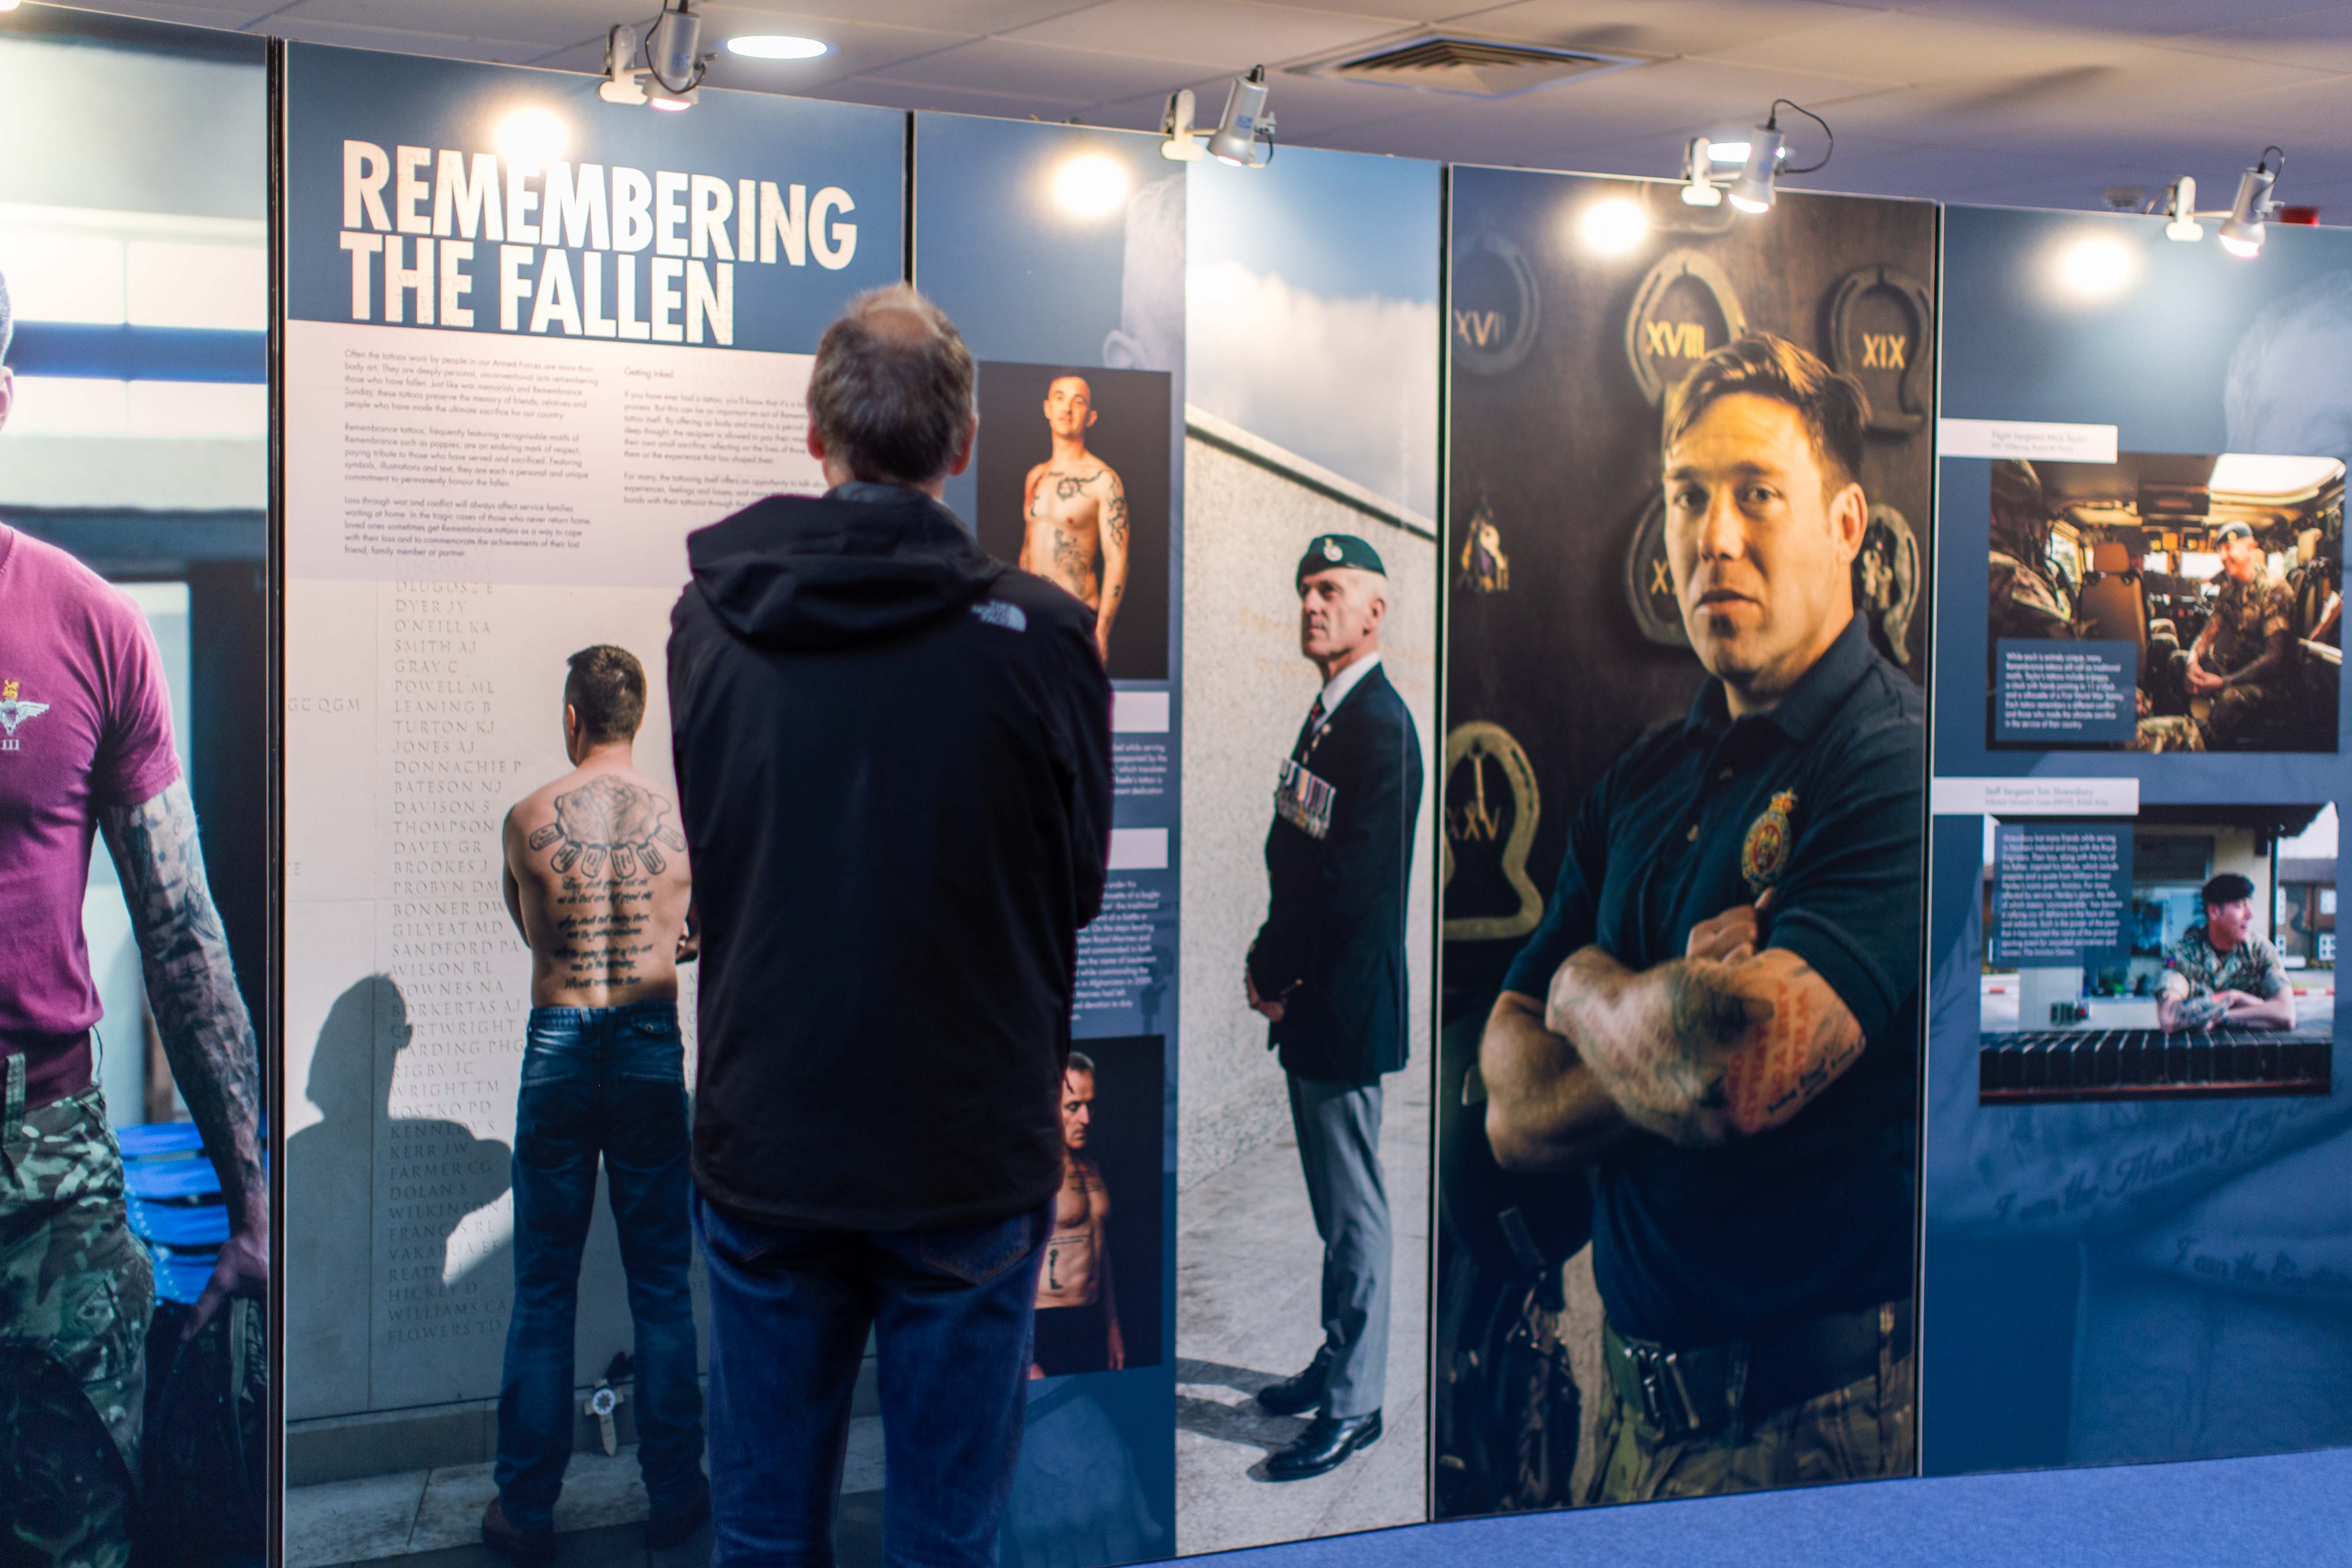 The Royal British Legion, together with the National Memorial Arboretum, worked with the Royal Navy, British Army and Royal Air Force to uncover how tattooing remains an emotional and meaningful act of Remembrance alive in our Armed Forces today.